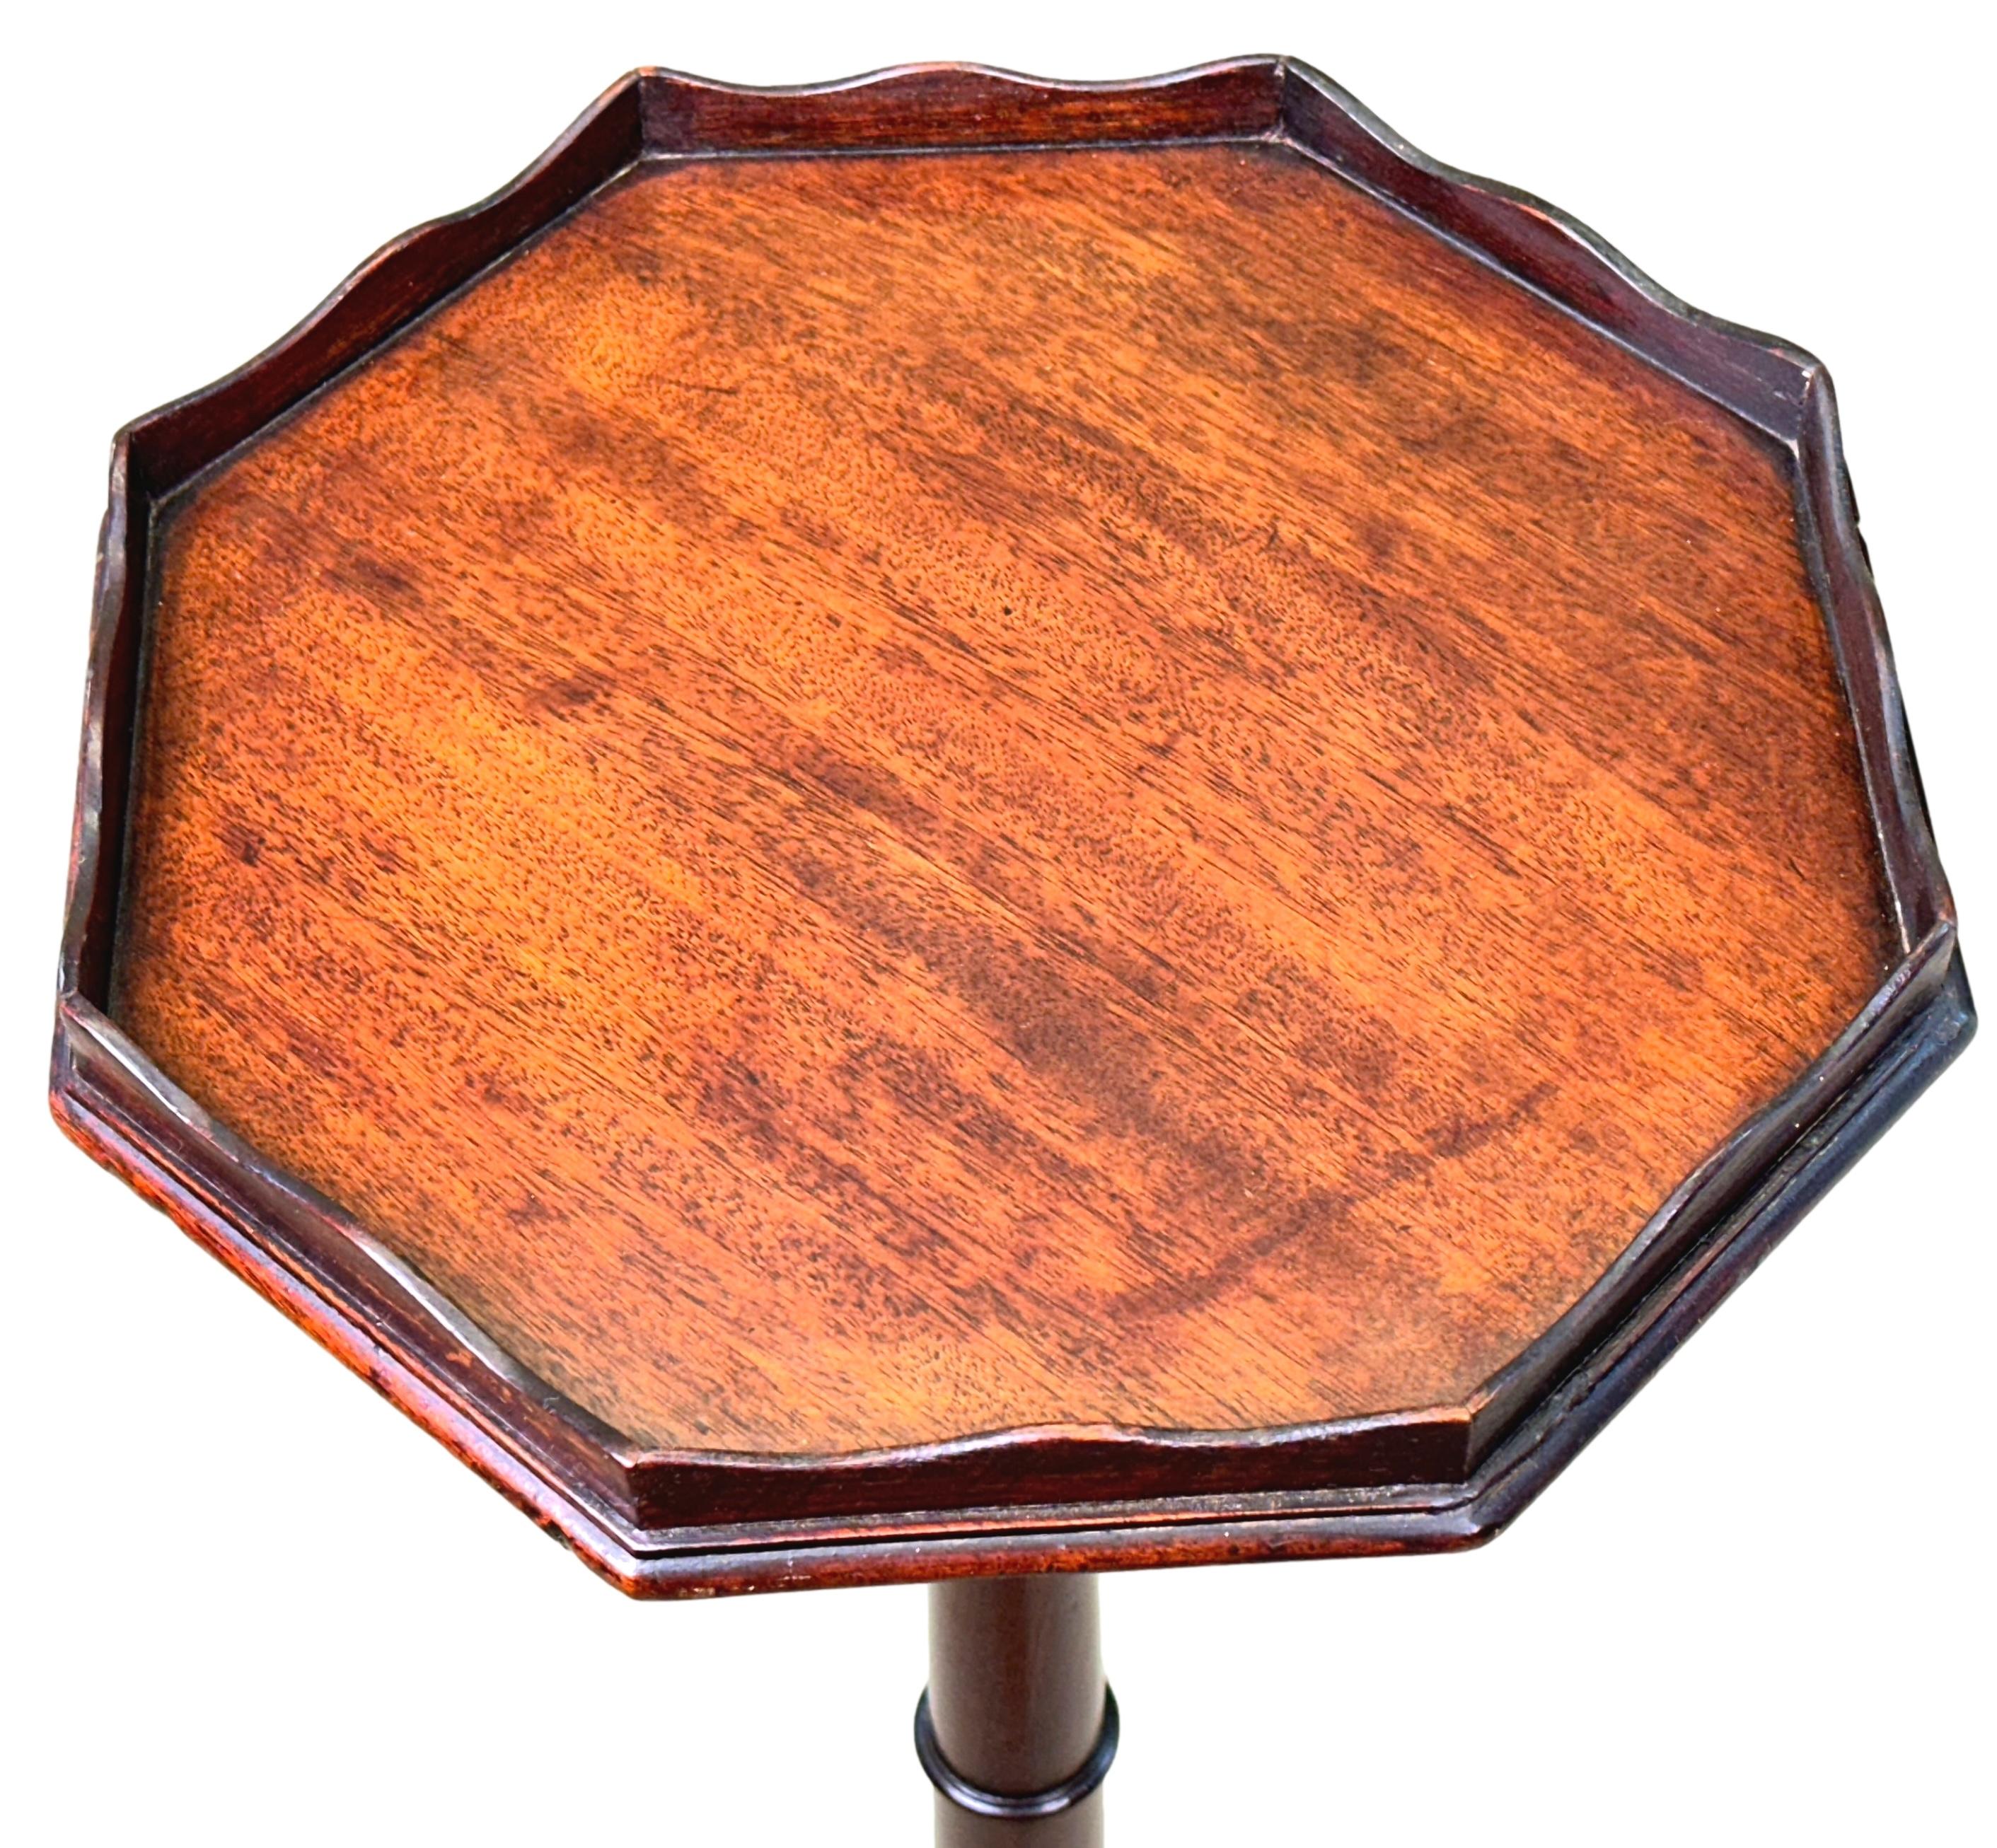 An Extremely Attractive And Very Good Quality Late 18th Century, George III Period, Mahogany Torchere, or Candle Stand, Having Well Figured Octagonal Top With Elegant Wavy Gallery, Raised On Fine Turned Central Column Terminating With Downswelt